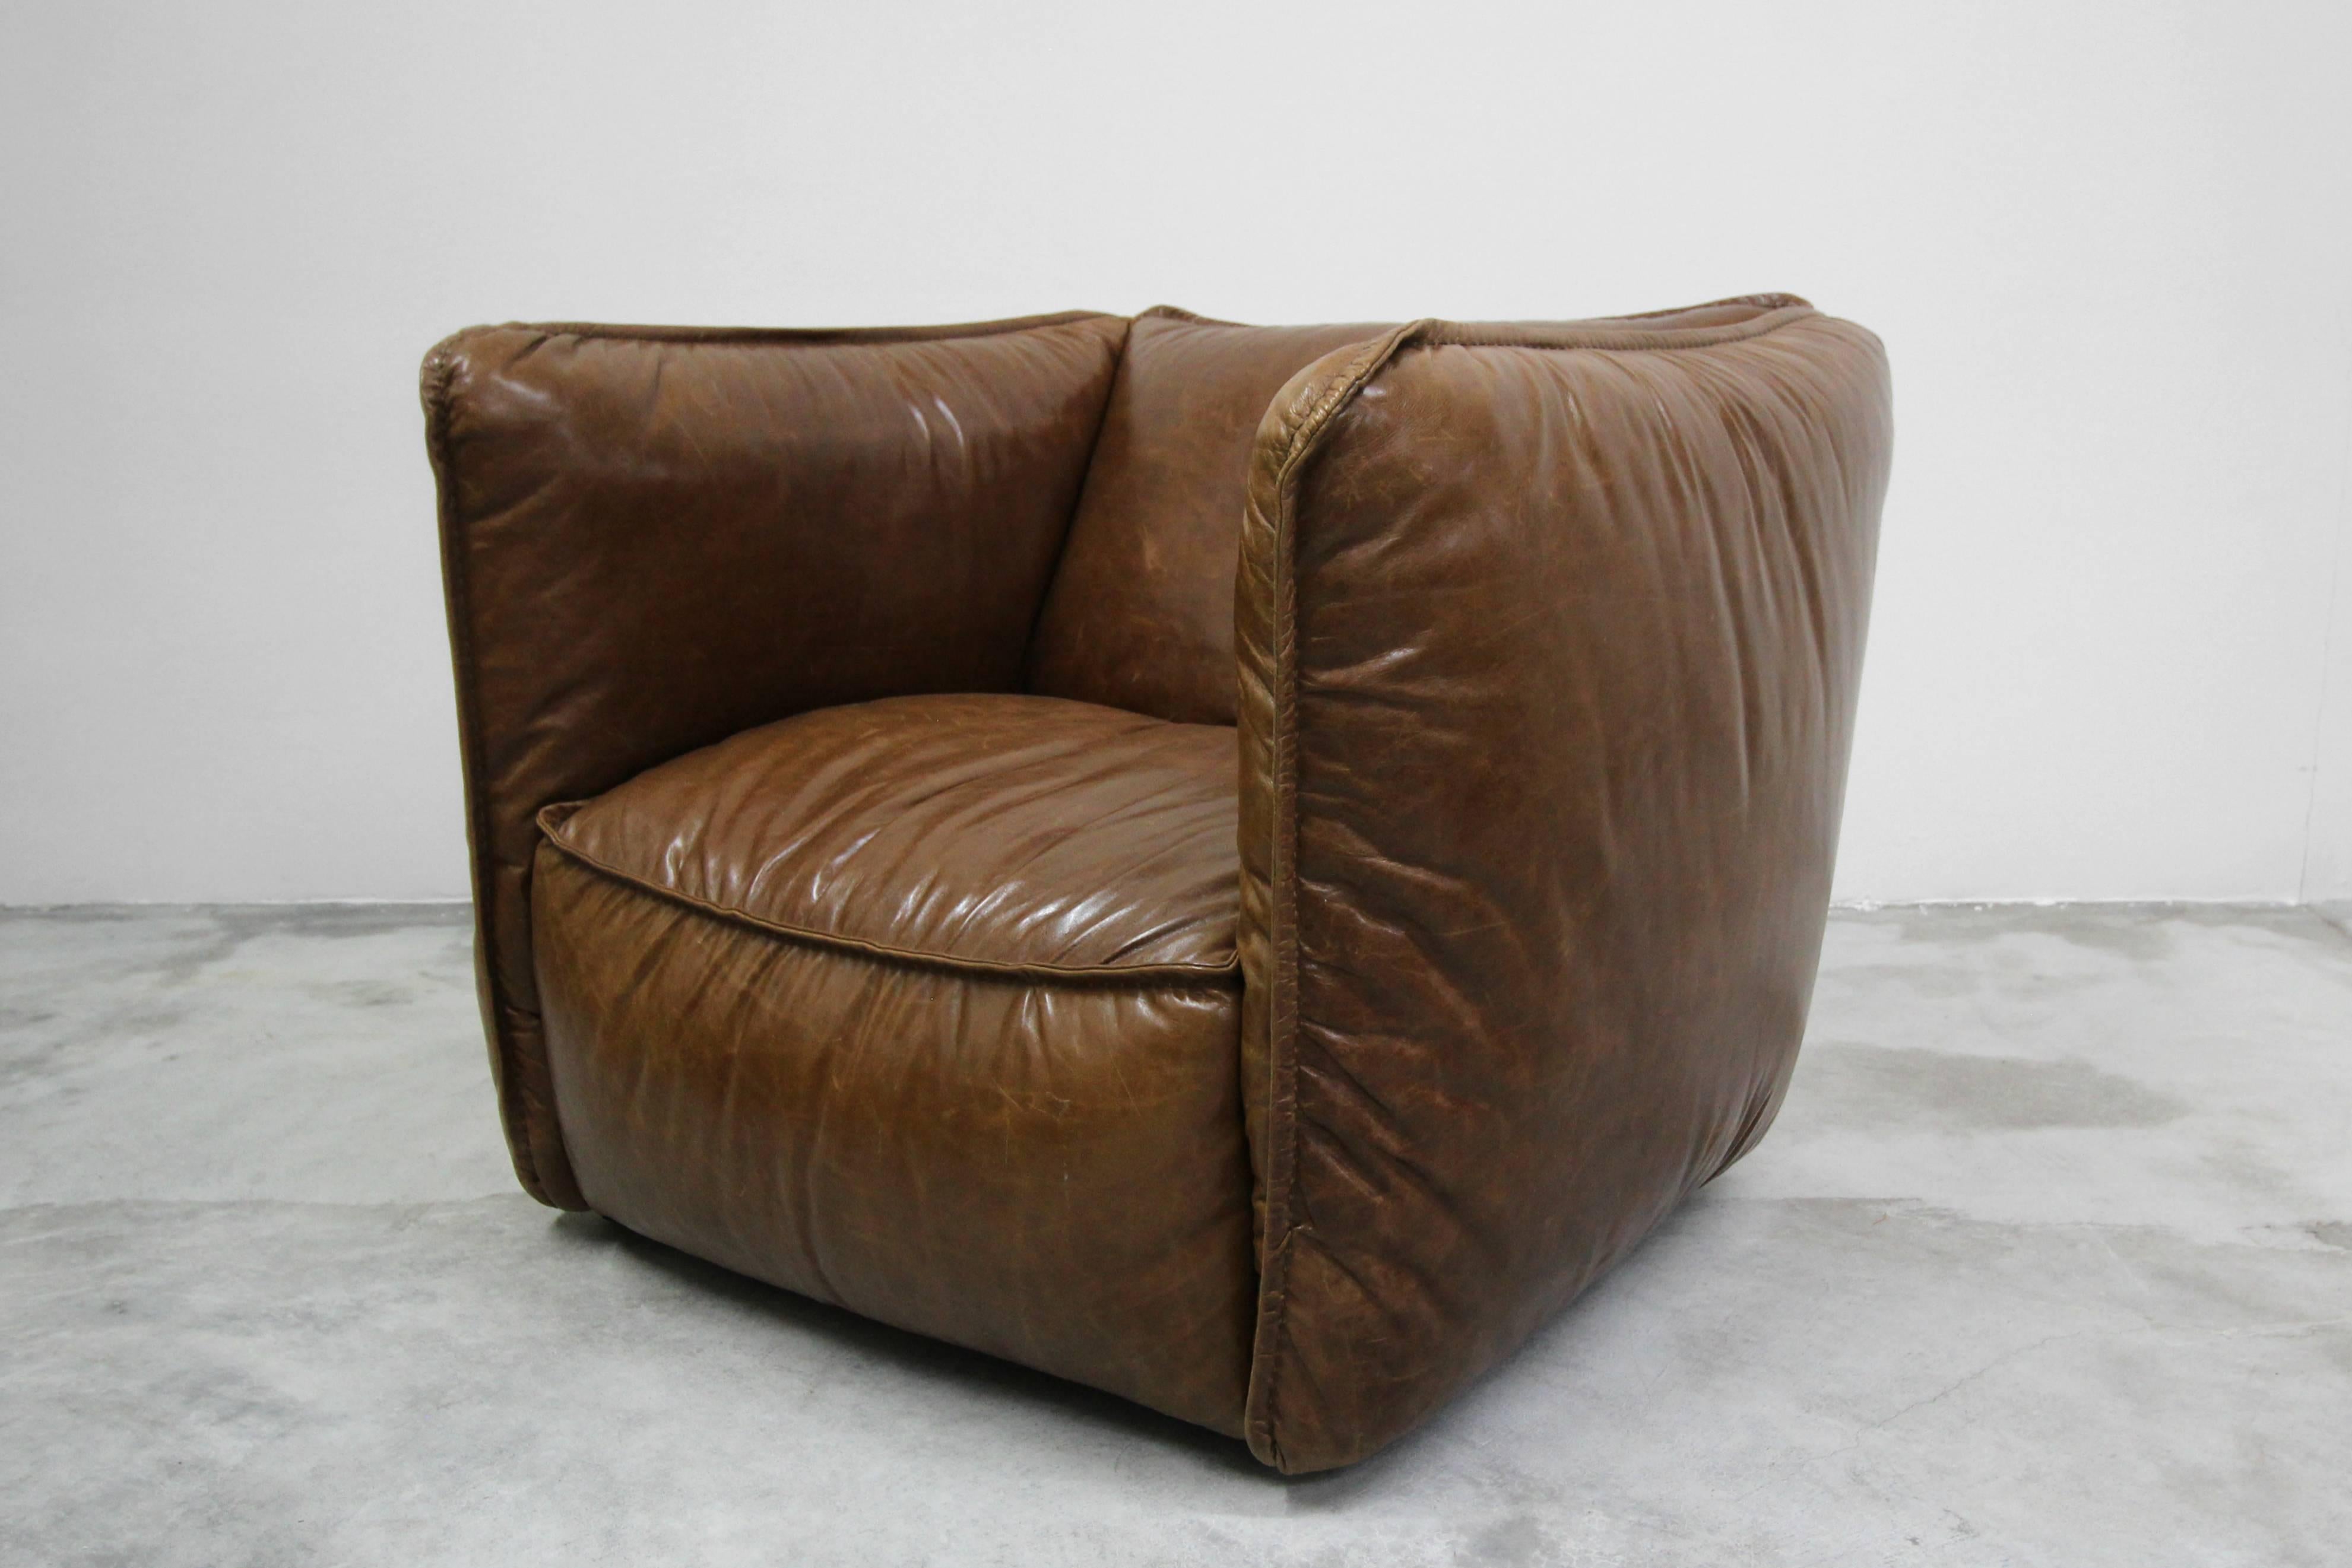 Large and comfy oversized leather club chair in a beautiful brown cigar leather. Features unique standing seams and exposed stitchwork. If you are looking for the perfect corner reading chair or a substitute to the generic recliner, this guy is it.